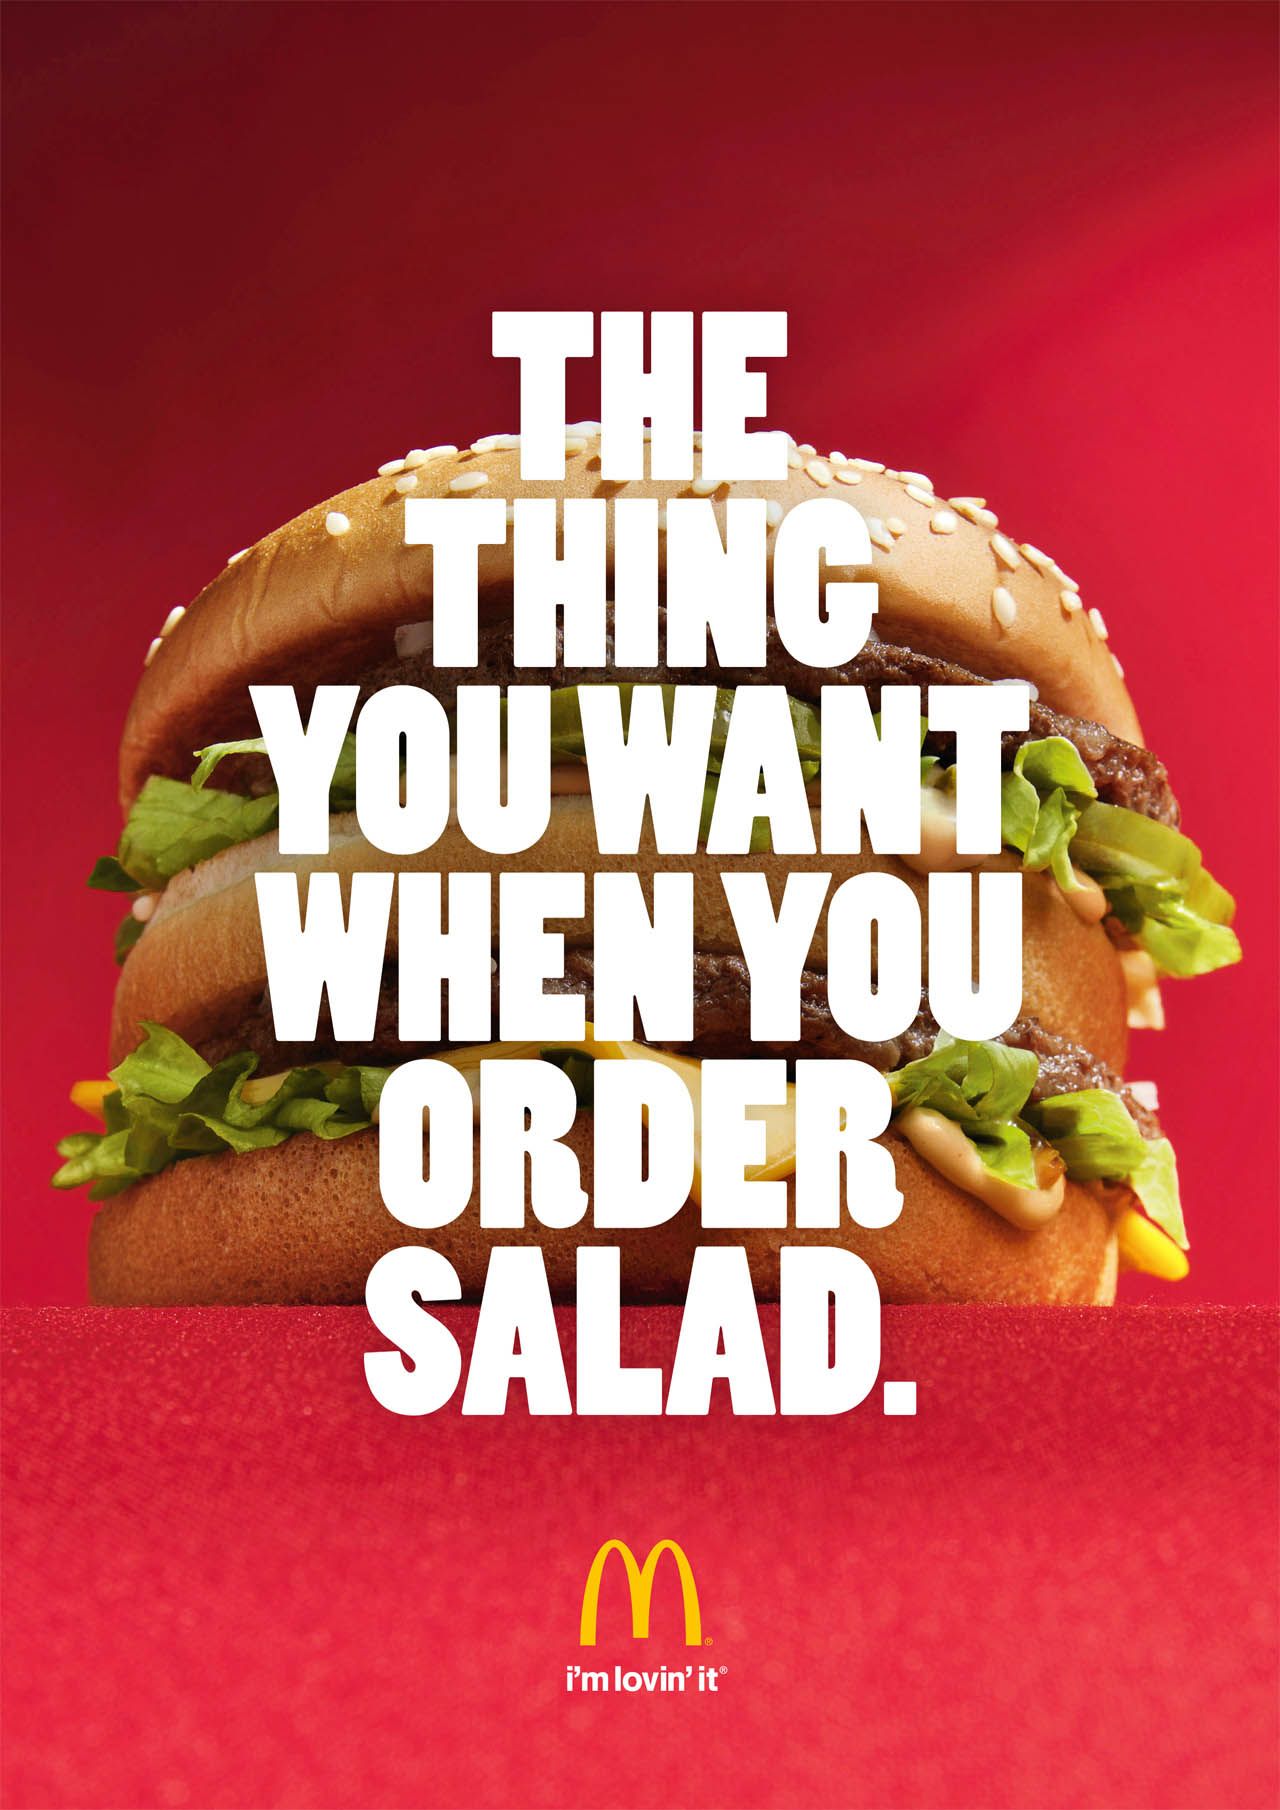 McDonalds The thing you want when you order salad. | International ...